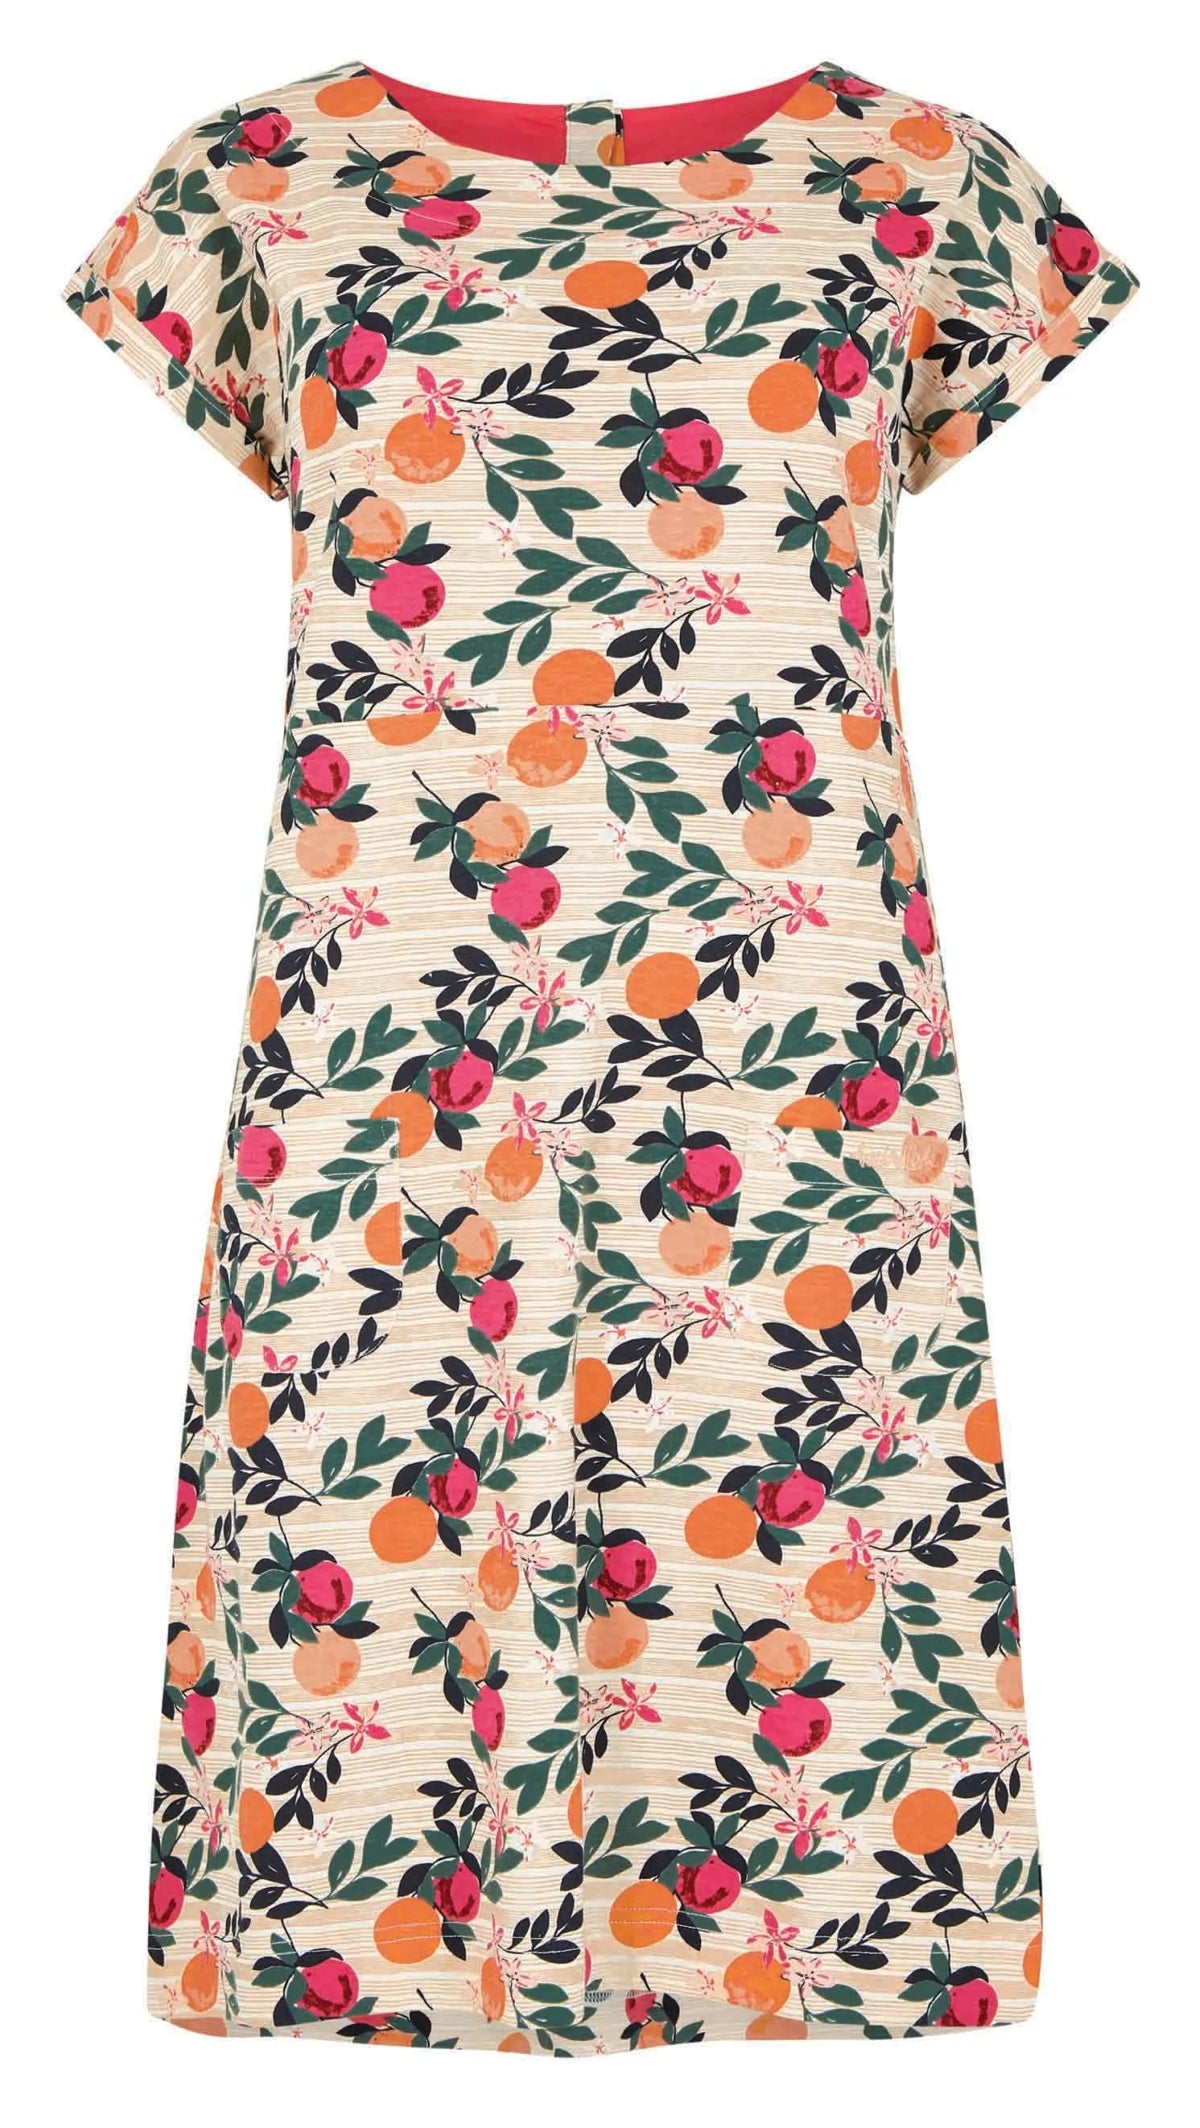 Short sleeve women's Tallahassee dress from Weird Fish in Cantaloupe print.